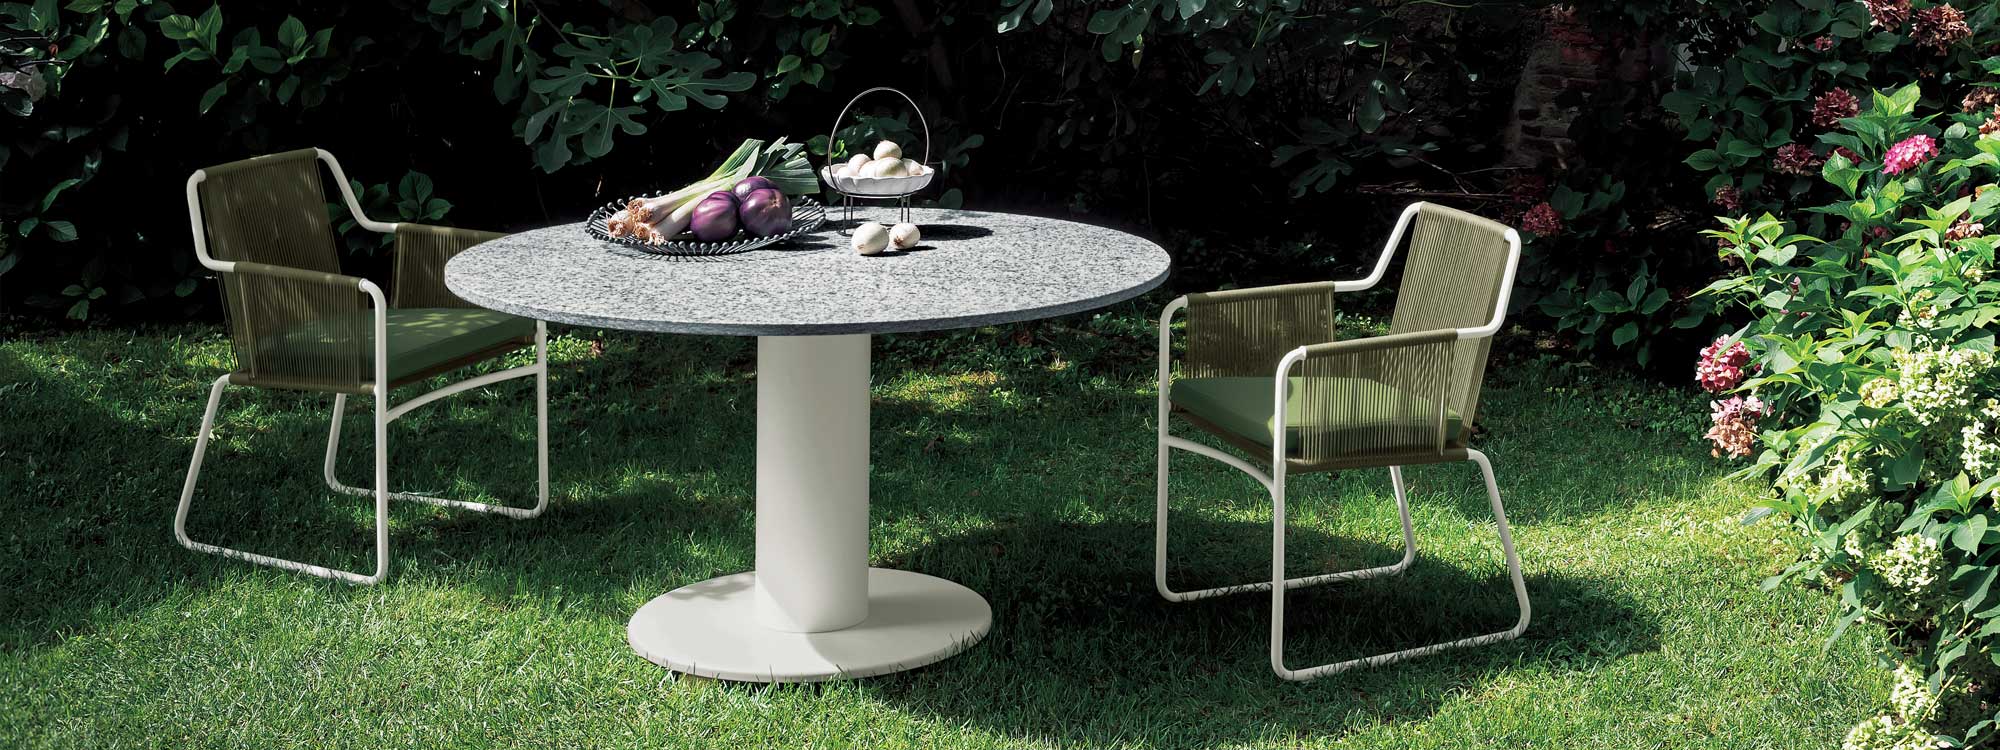 Image of RODA Platter circular garden pedestal table with white stem bas and grey stone table top, together with white Harp garden chairs